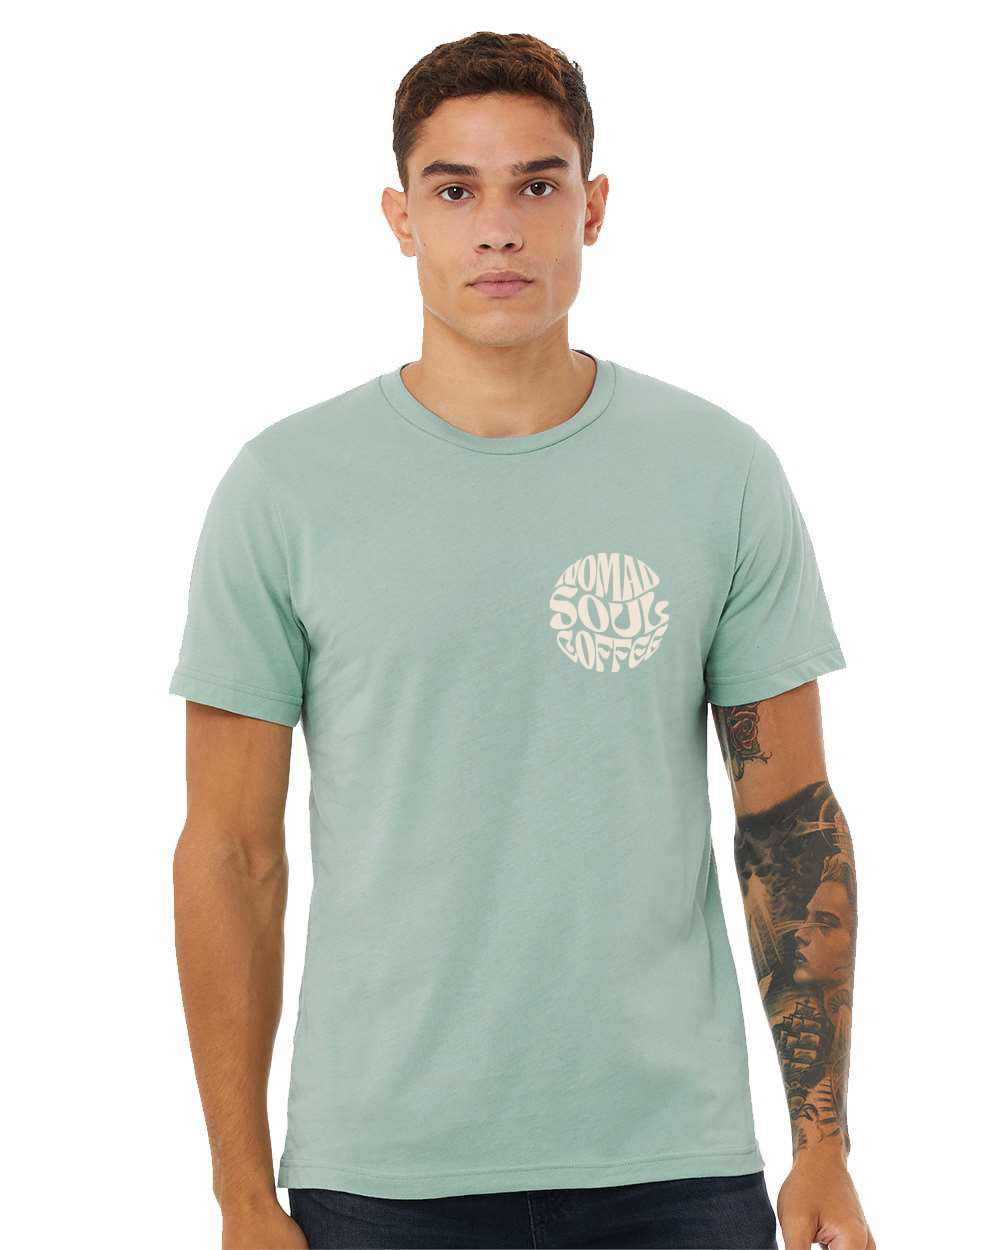 Frothing T-Shirt (Seafoam Turquoise) - Nomad Soul Coffee Co.